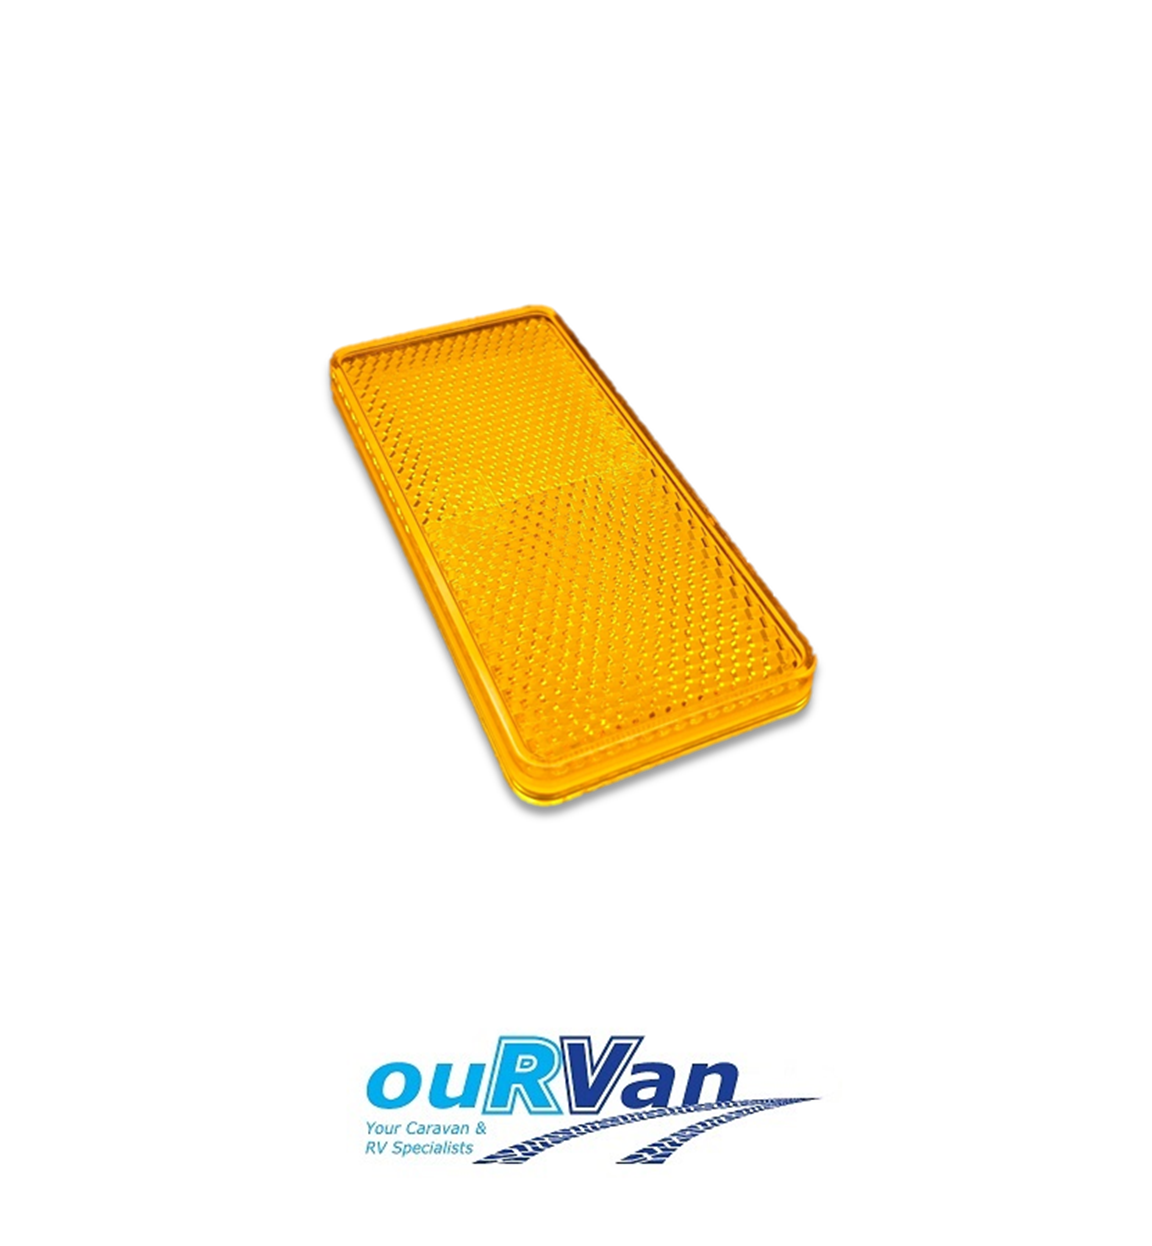 x 84051 EQUIVALENT 94mm x 44mm AMBER SELF ADHESIVE REFLECTOR – OUR VAN RV